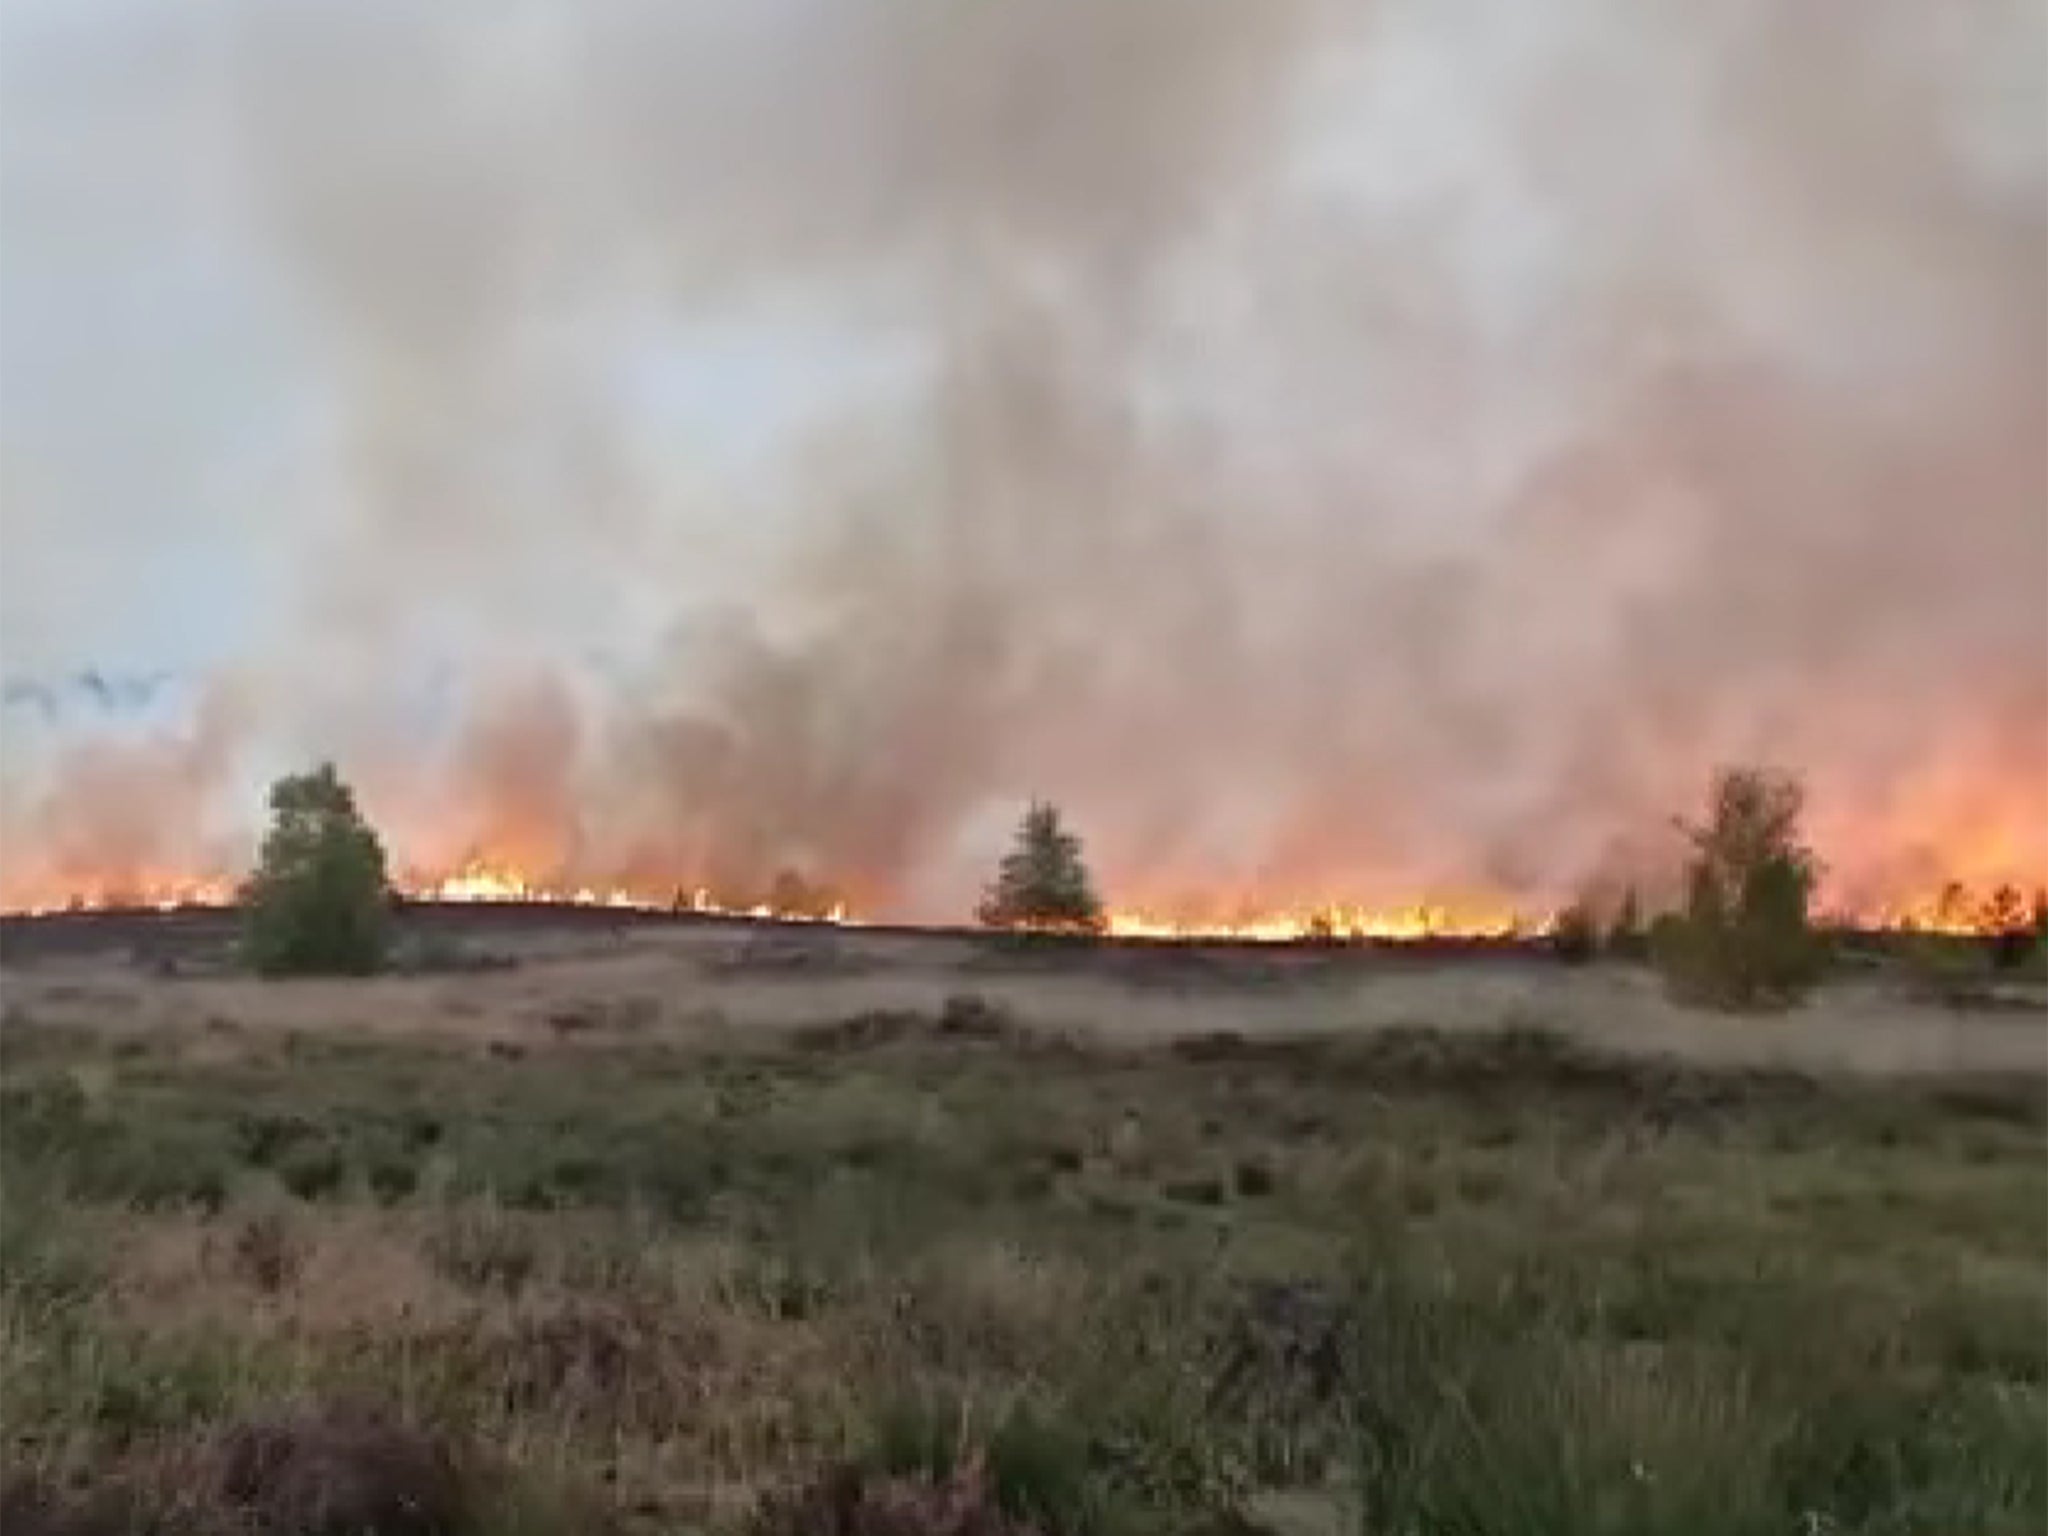 Hankley Common saw some of the largest blazes